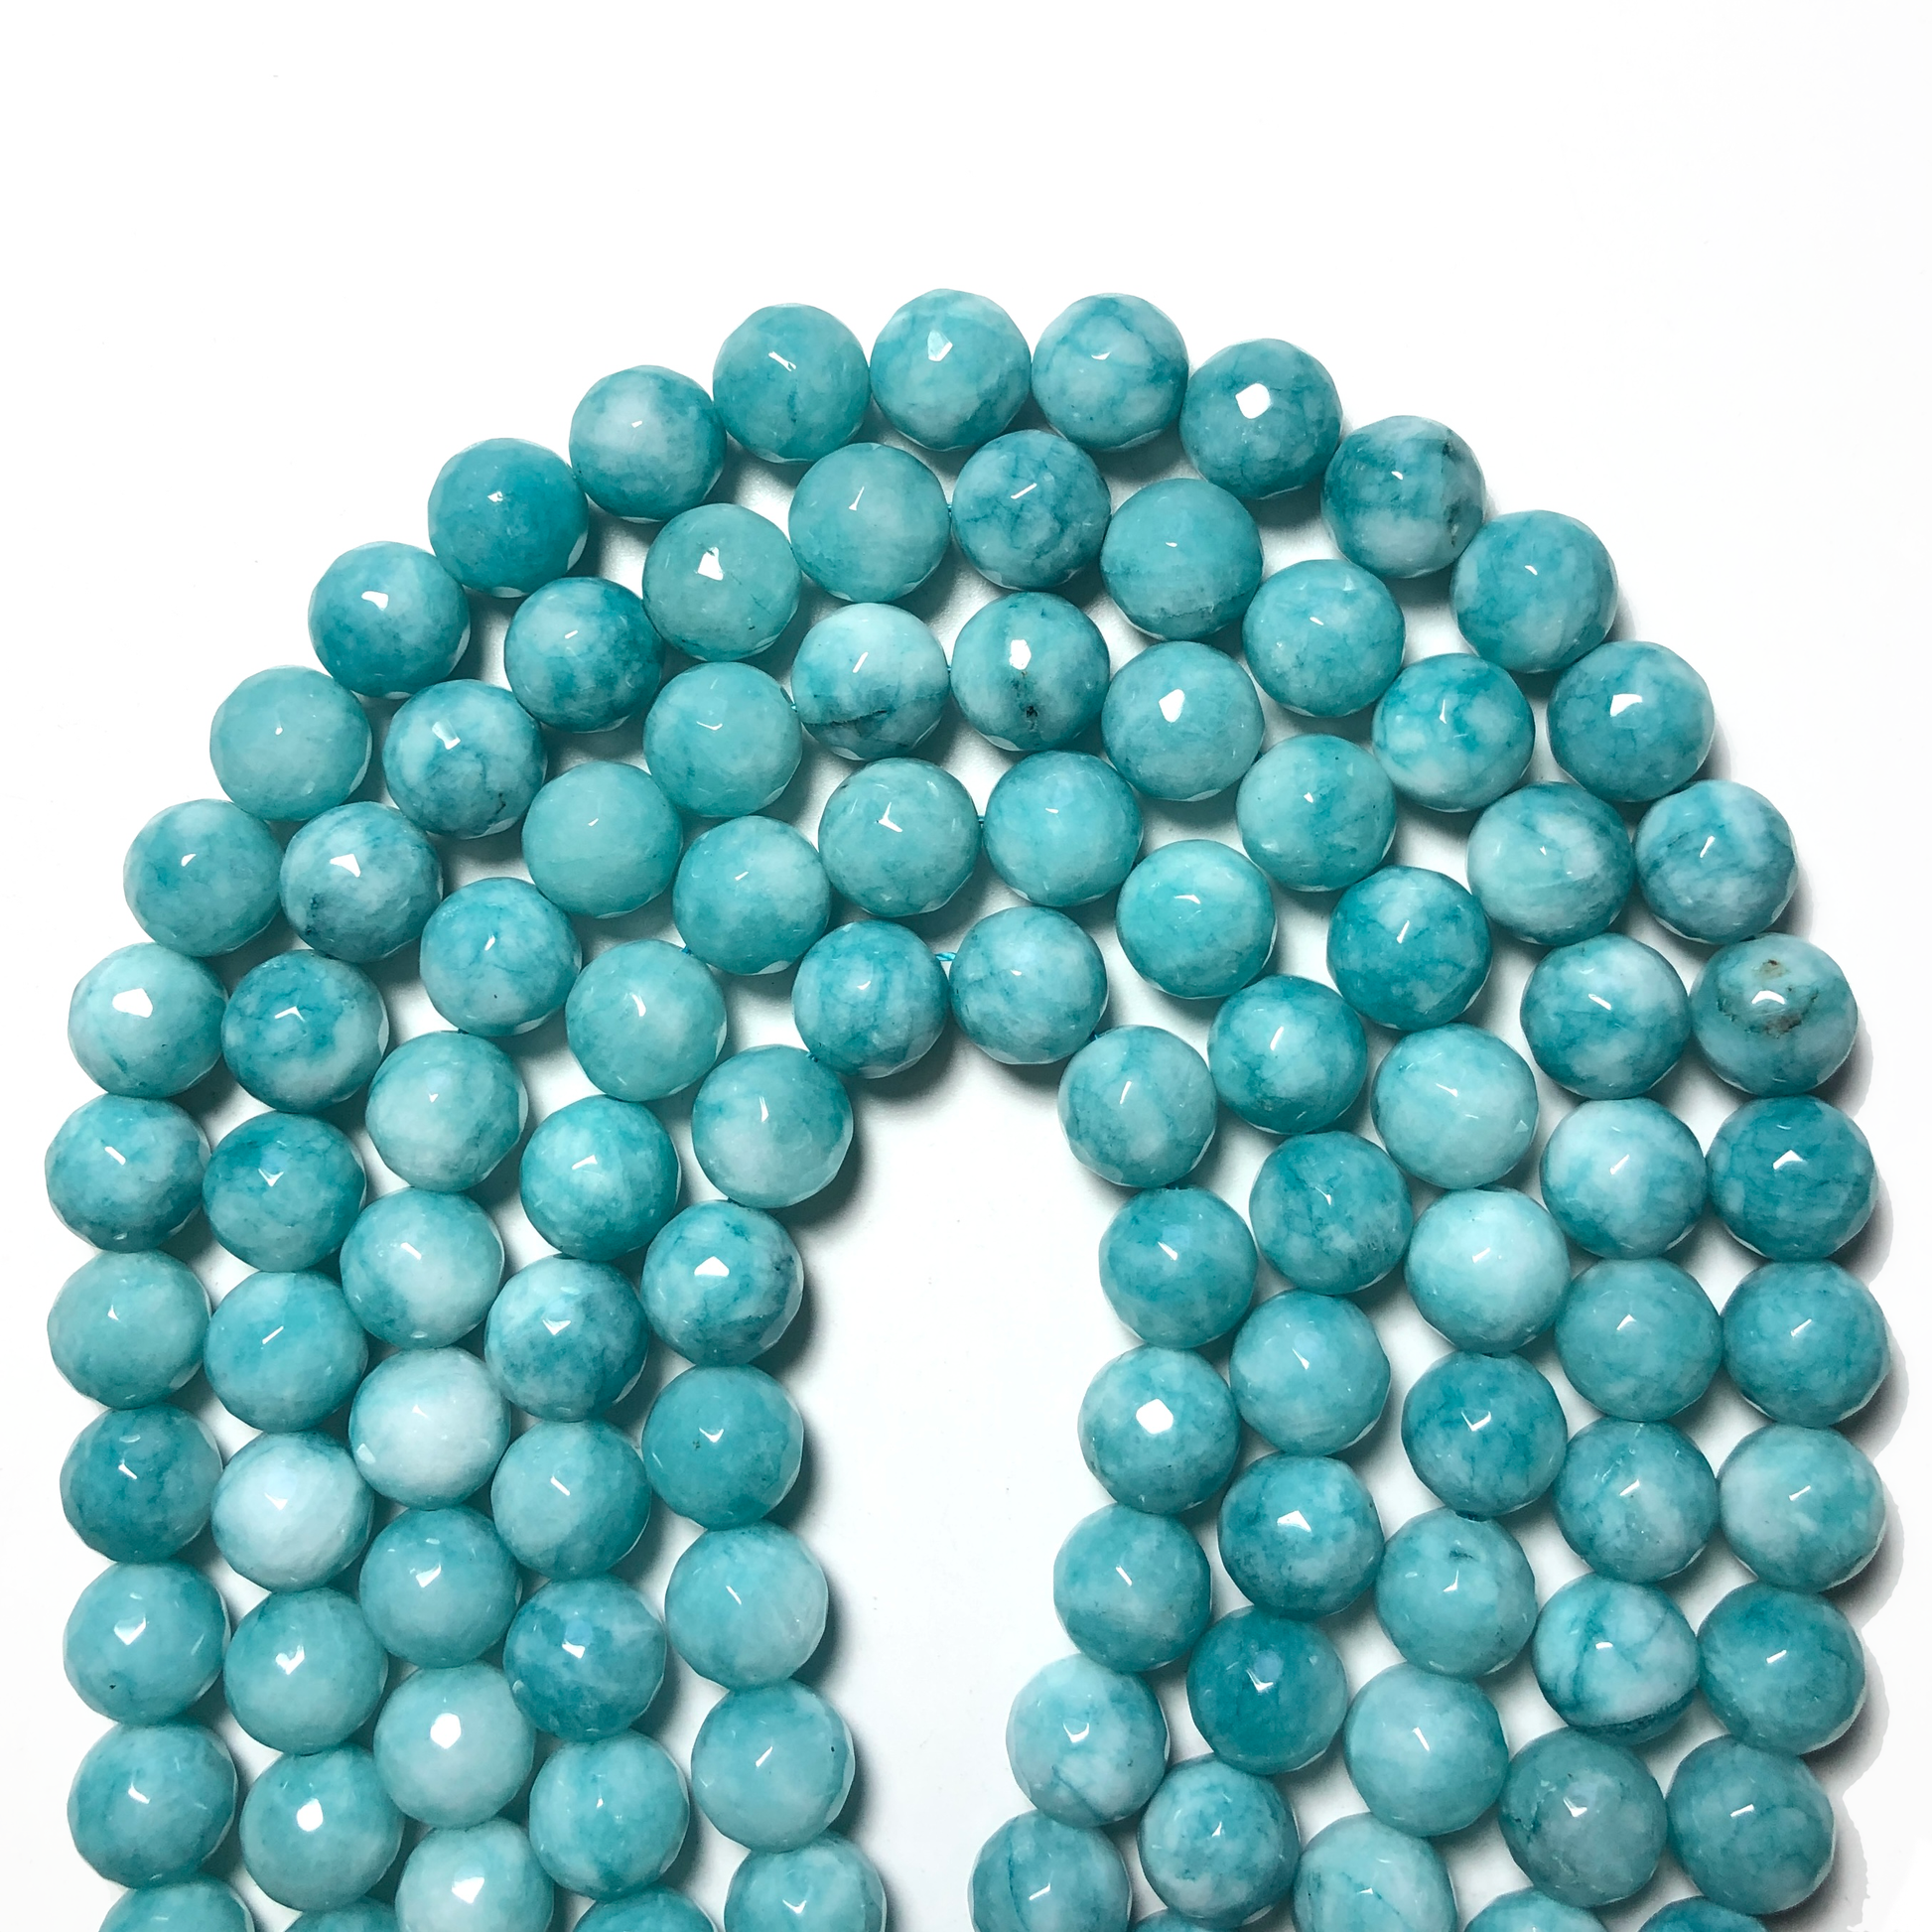 2 Strands/lot 12mm Turquoise Light Blue Faceted Jade Stone Beads Stone Beads 12mm Stone Beads Faceted Jade Beads New Beads Arrivals Charms Beads Beyond